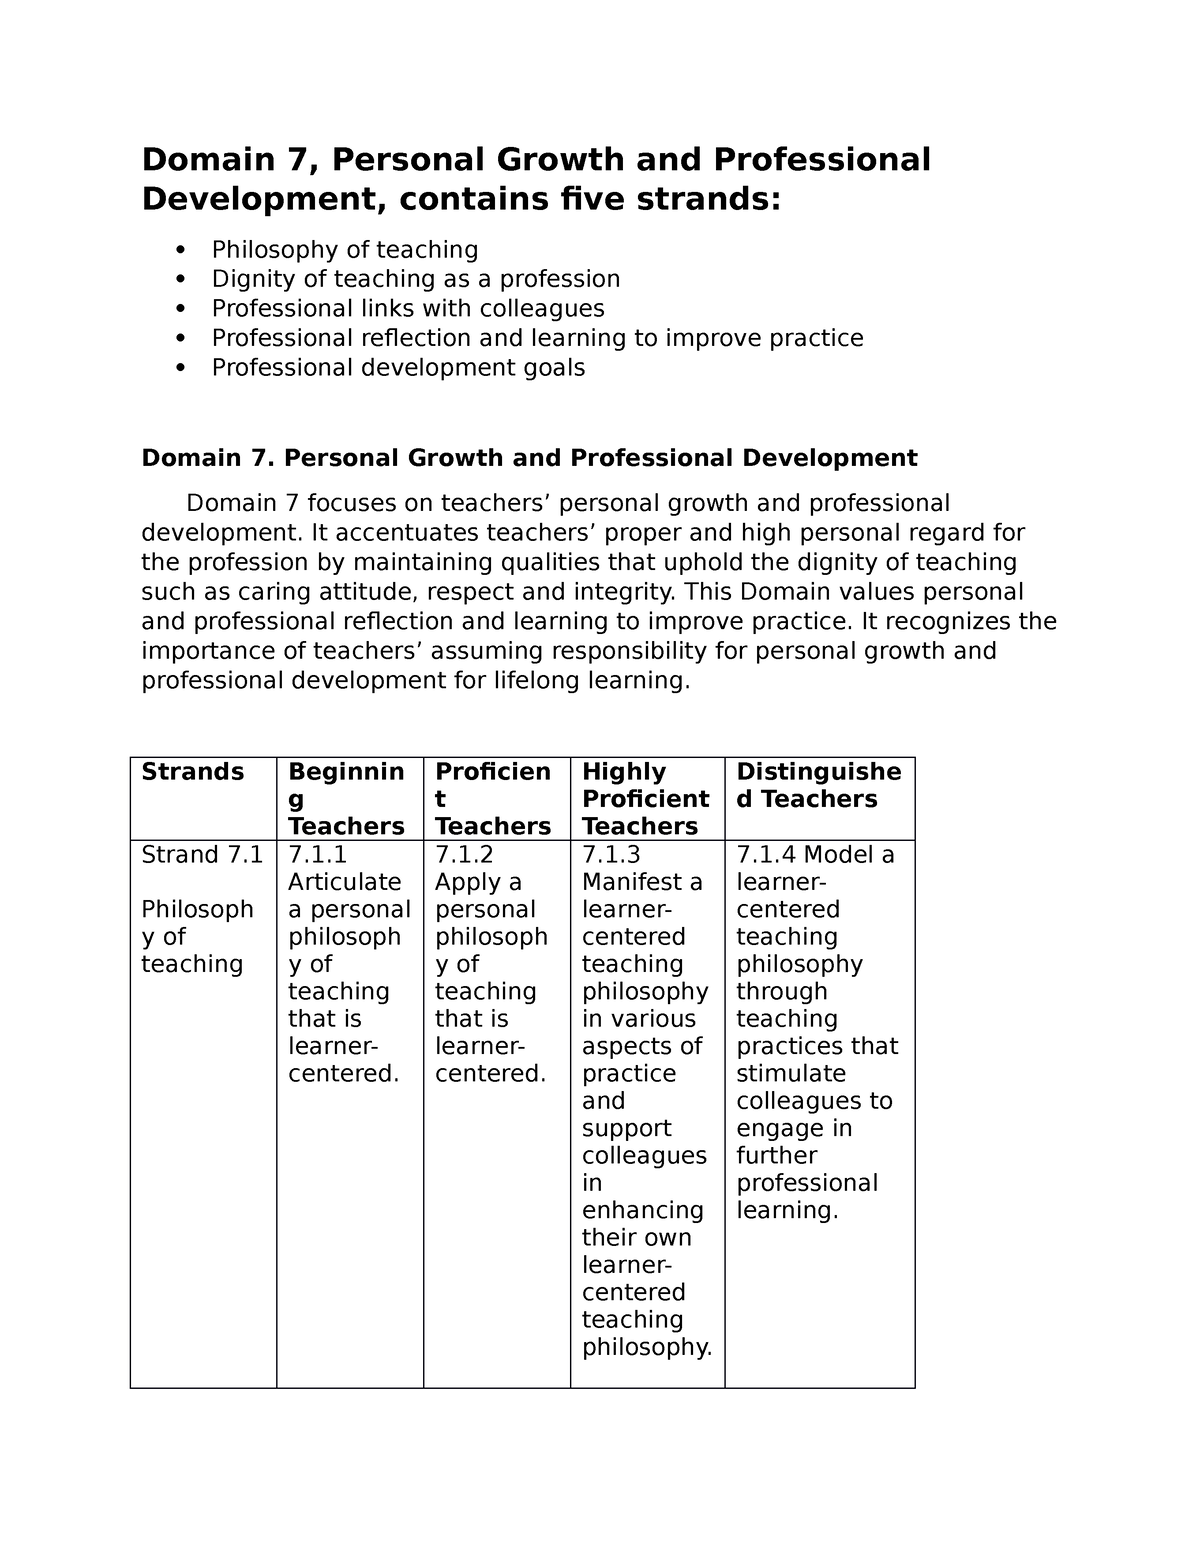 domain 7 personal growth and professional development essay